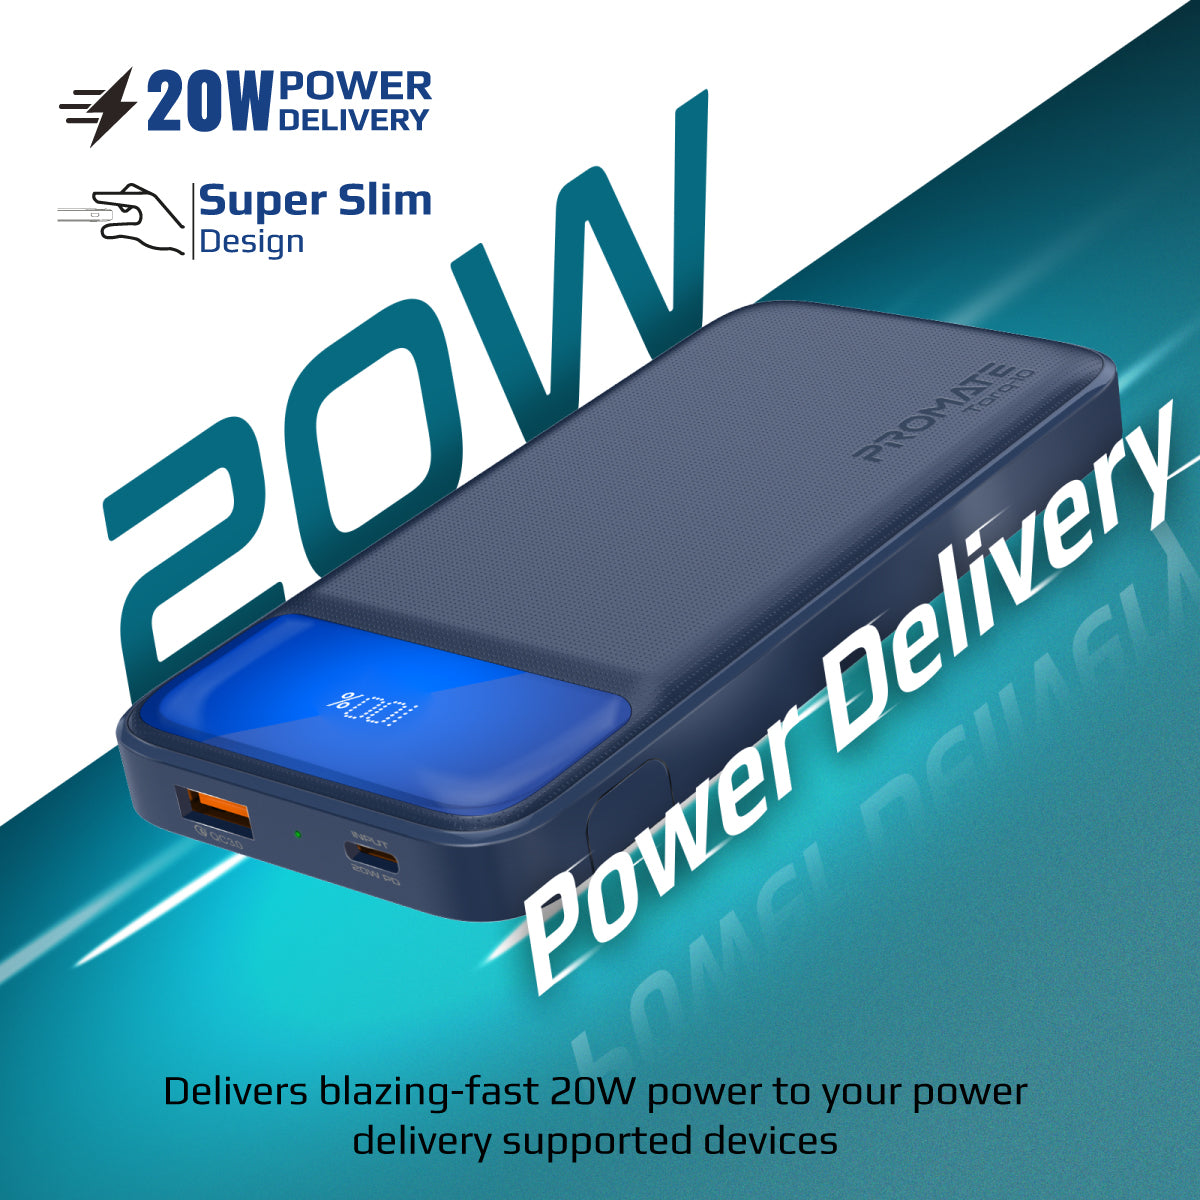 Promate Power Bank with 10000mAh Battery, Kickstand, 20W USB-C PD Port and QC 3.0 18W Port, Torq-10 Navy